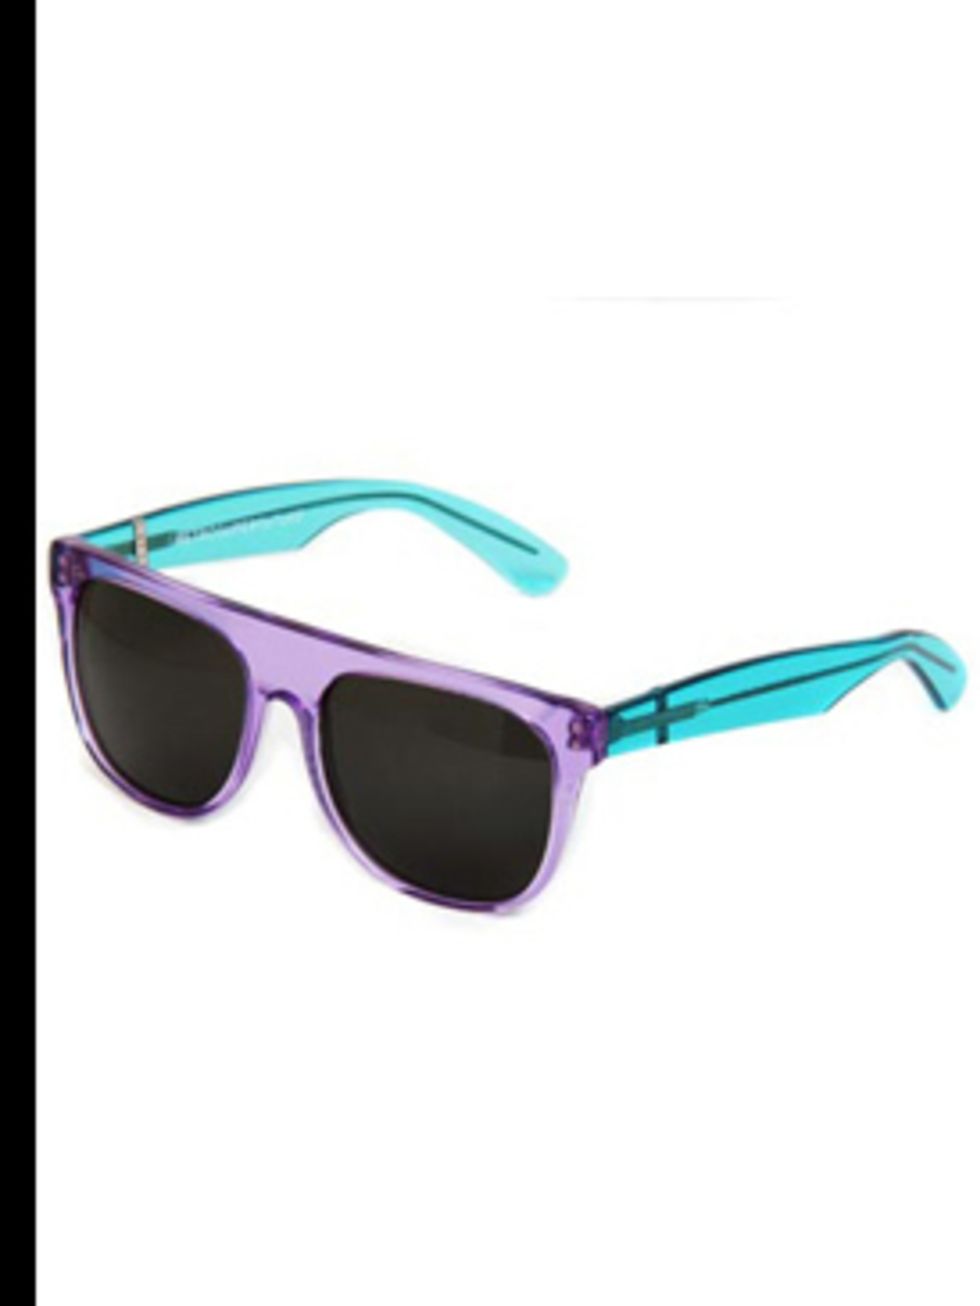 <p>Sunglasses, £93, by Retrosuperfuture at <a href="http://www.ninaandlola.com/retrosuperfuture-sunglasses/retrosuperfuture-sunglasses-turquoise-with-pink-arms-and-zeiss-lenses.html">www.ninaandlola.com</a></p>